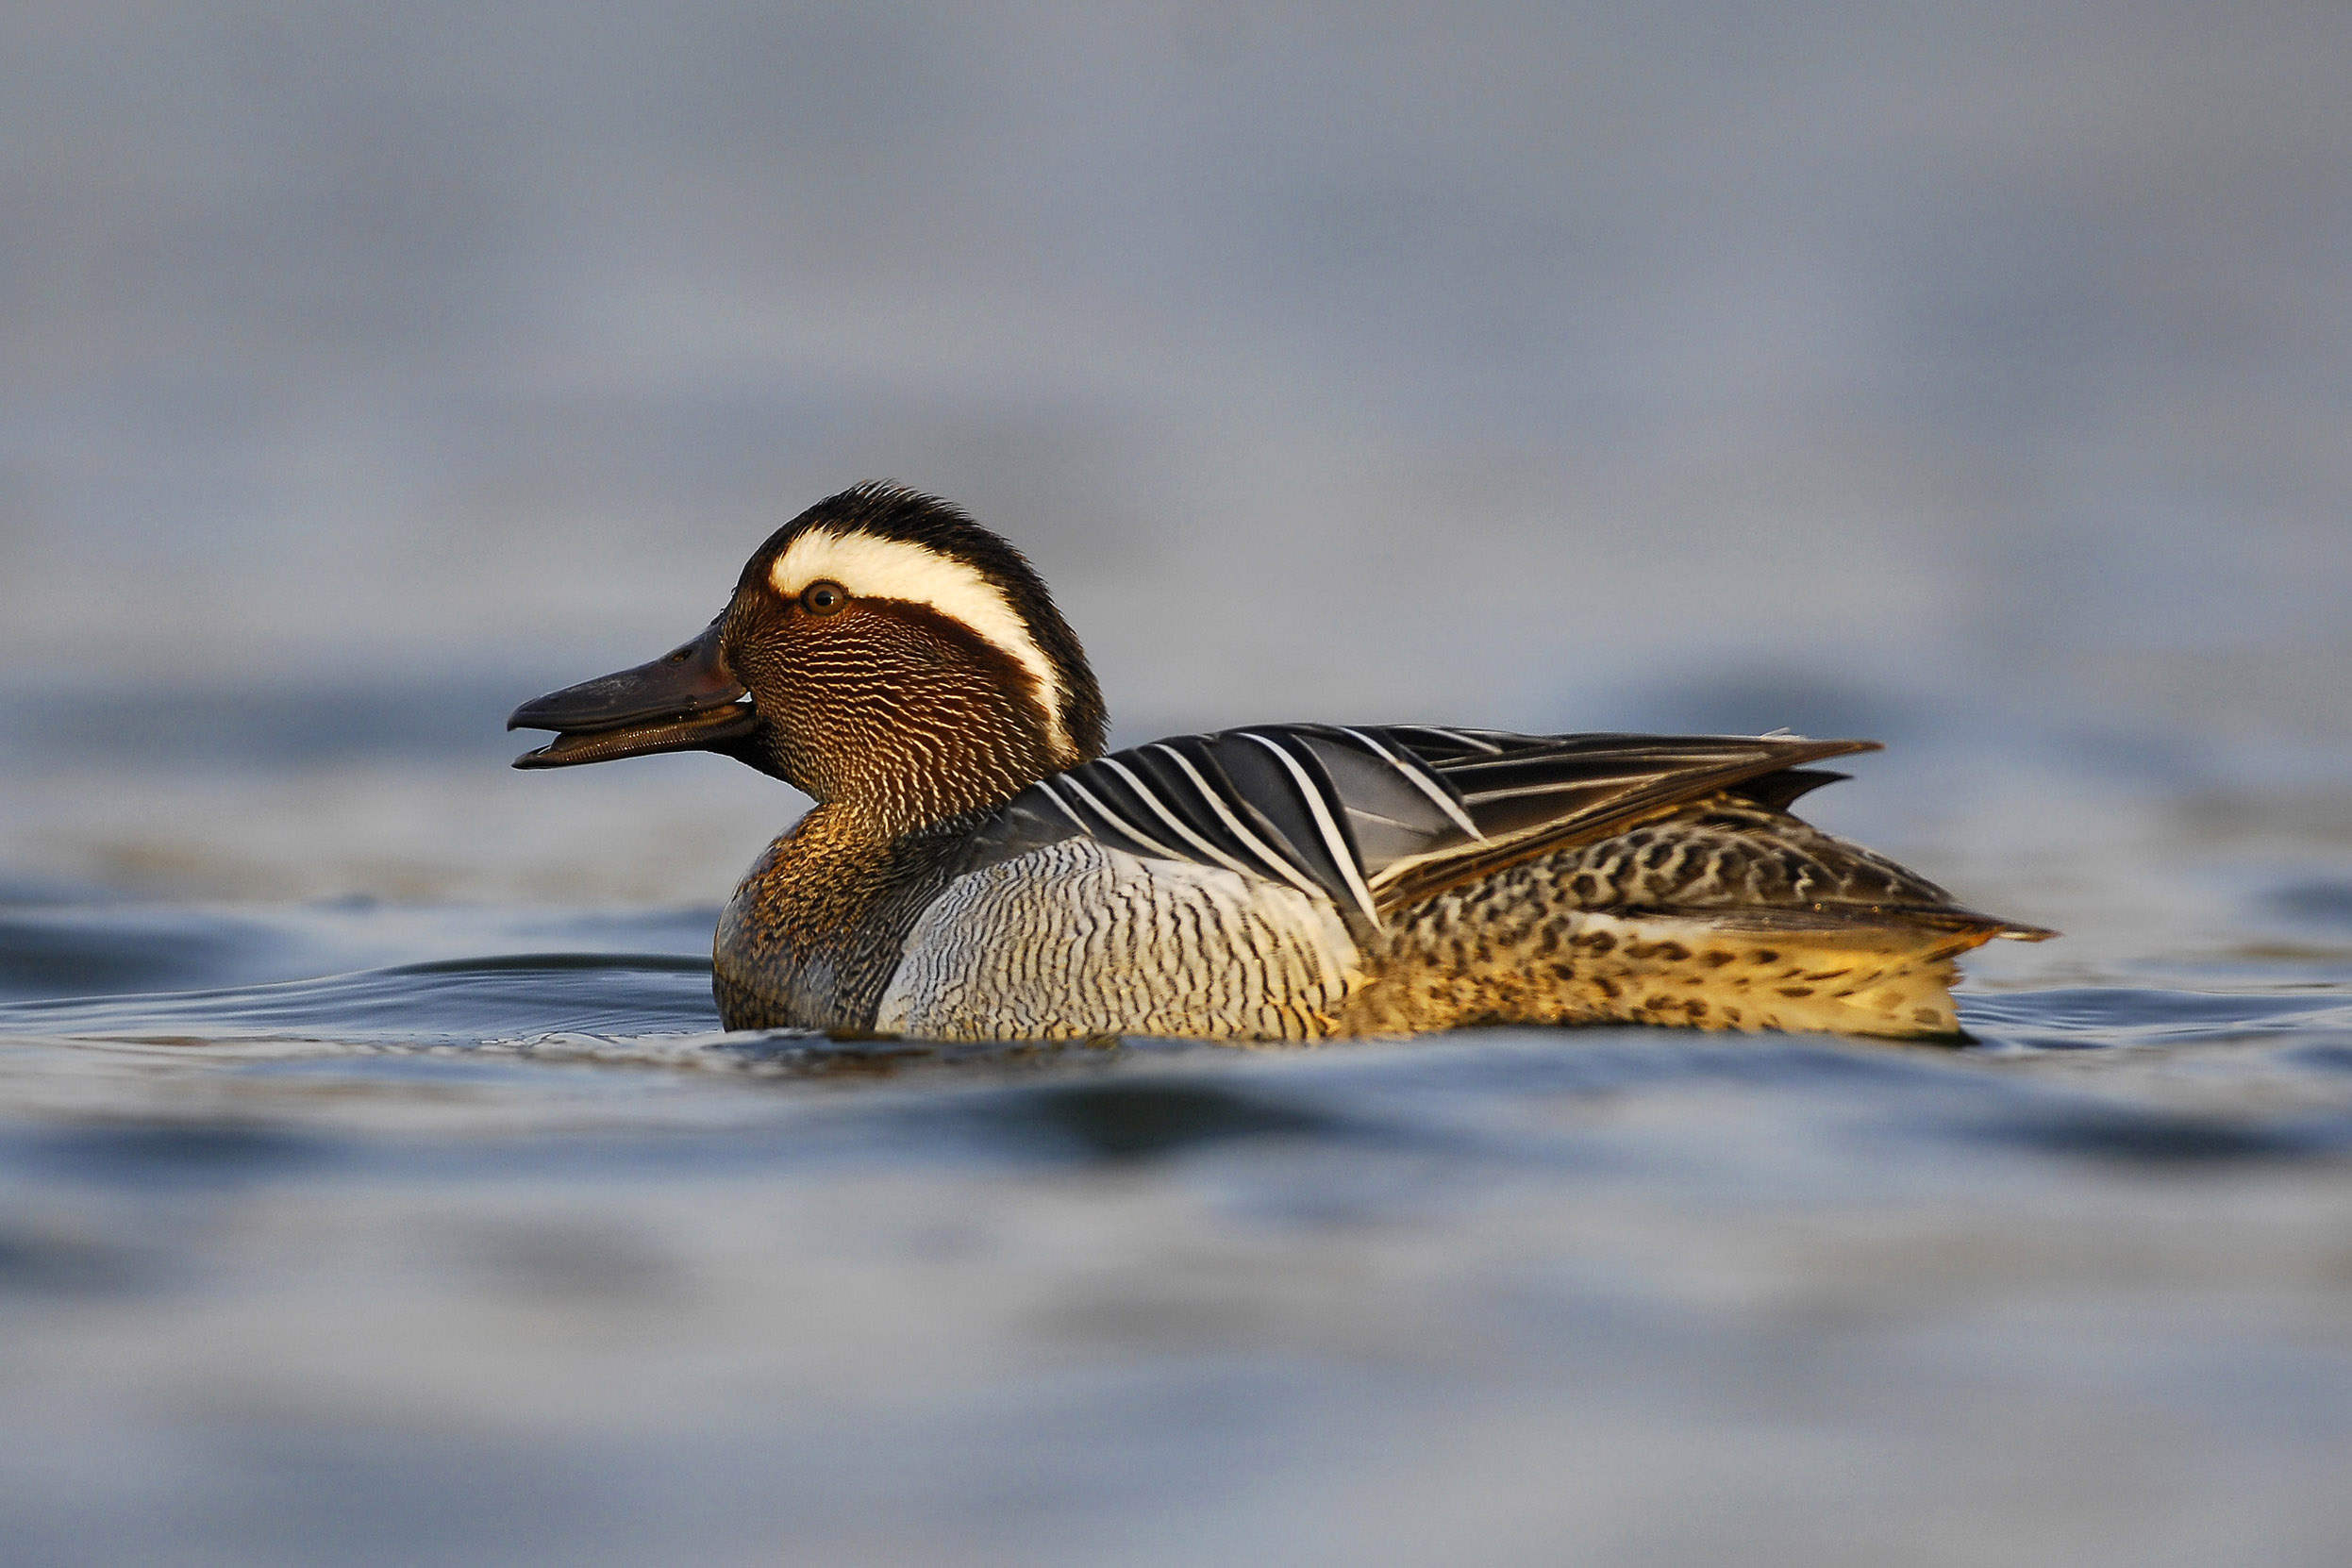 A lone Garganey sat on a body of water.